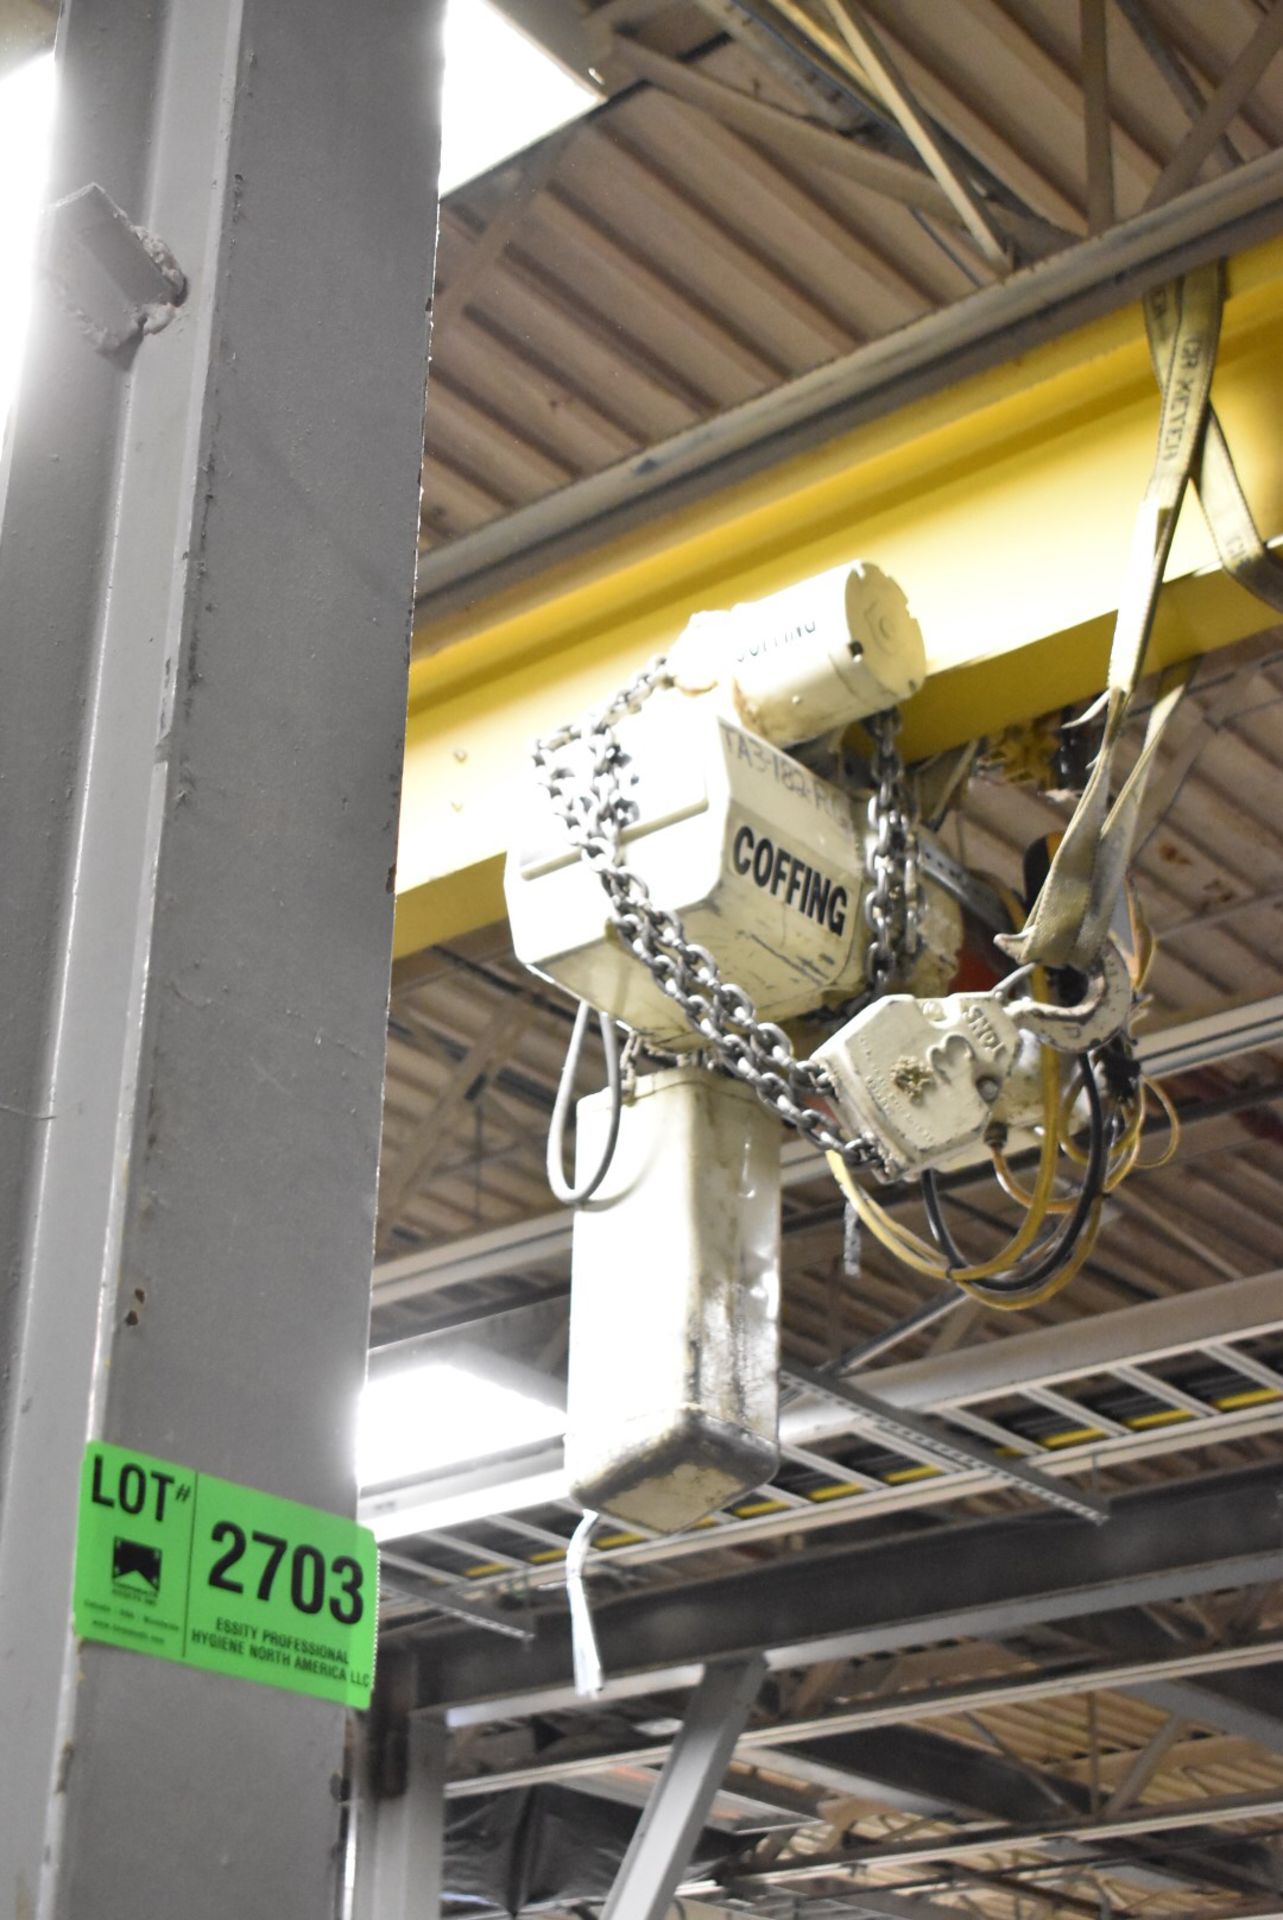 COFFING 3 TON ELECTRIC CHAIN HOIST (CI) [RIGGING FEES FOR LOT #2703 - $150 USD PLUS APPLICABLE